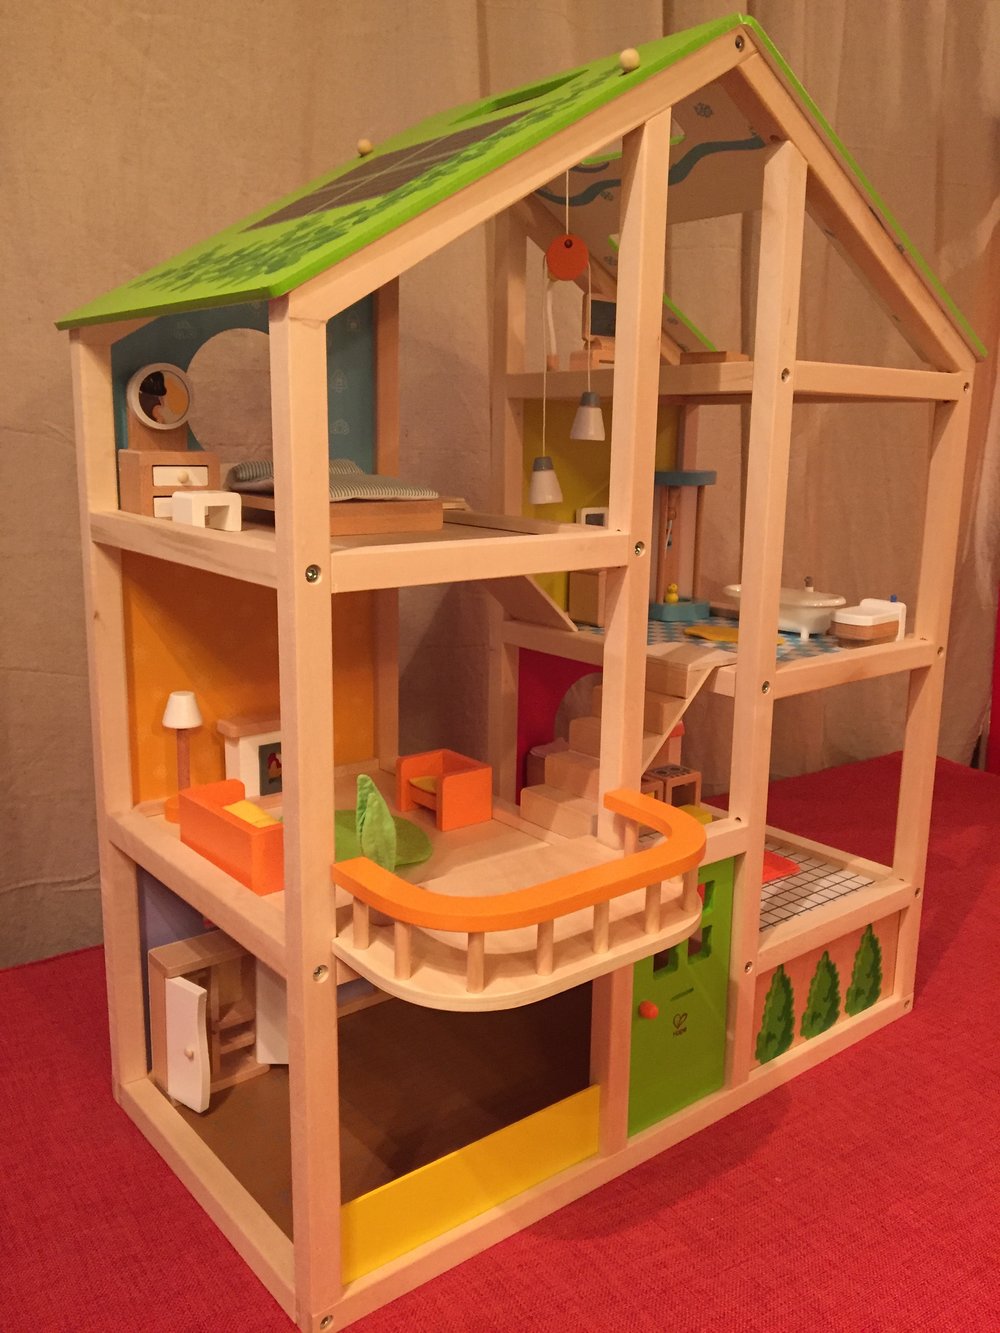 All Seasons Kids Wooden Dollhouse by Hape | Award Winning 3 Story Dolls  House Toy with Furniture, Accessories, Movable Stairs and Reversible Season